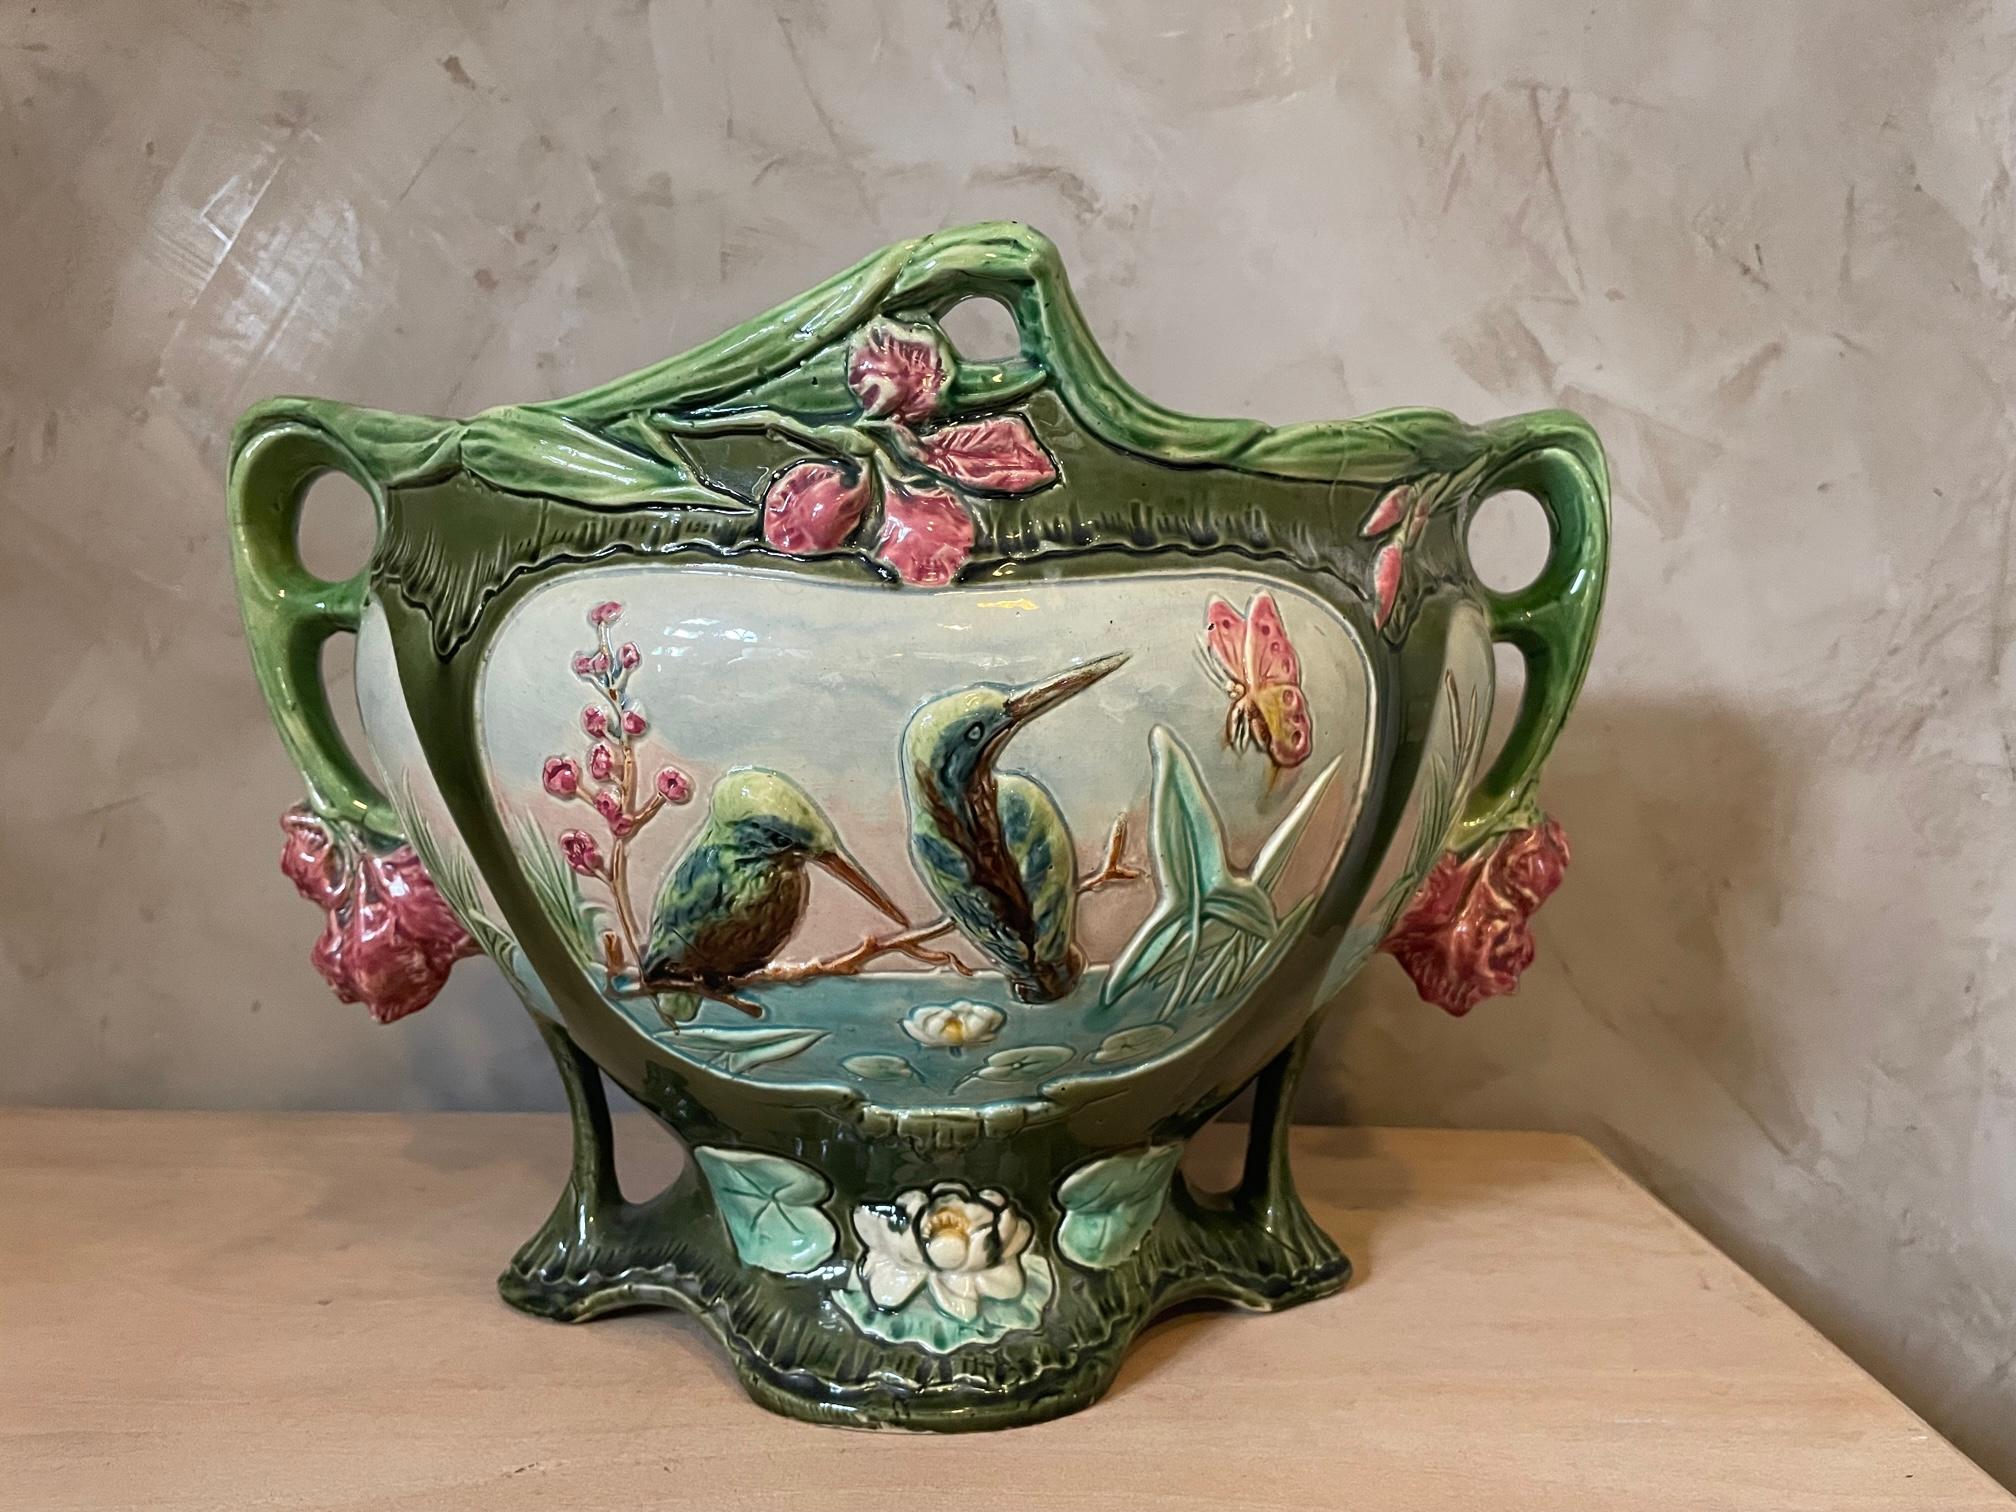 Beautiful 20th century French Painted Ceramic barbotine cachepot from the 1900s. Kingfisher and flower decoration. 
Very nice green and pink color. 
Good quality and condition. 